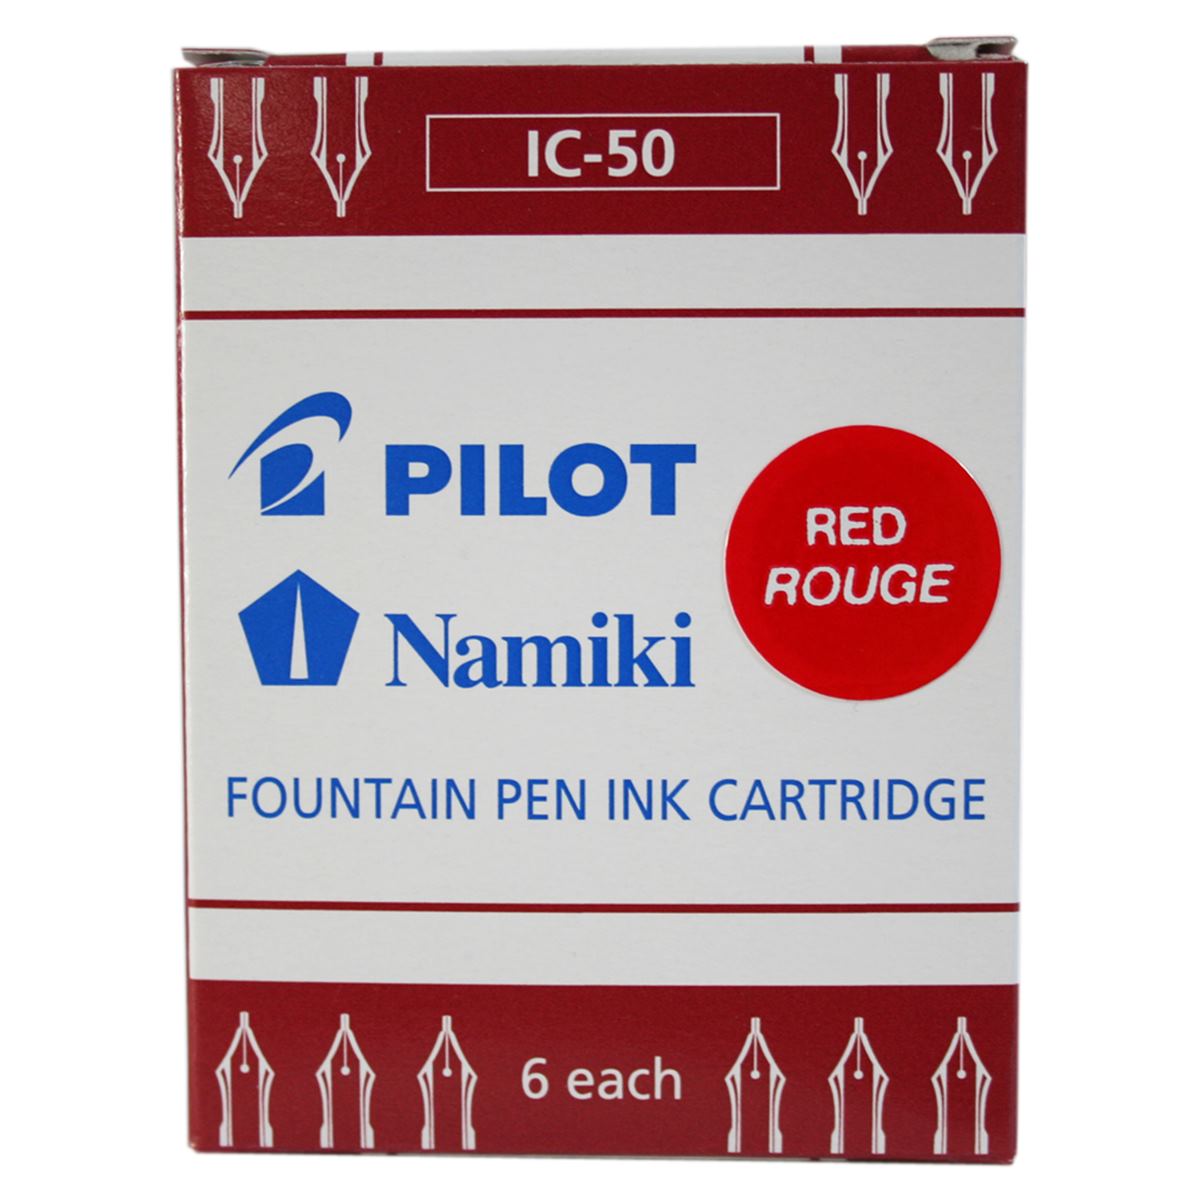 Pilot IC-50 Red Ink Cartridges - Pack of 6